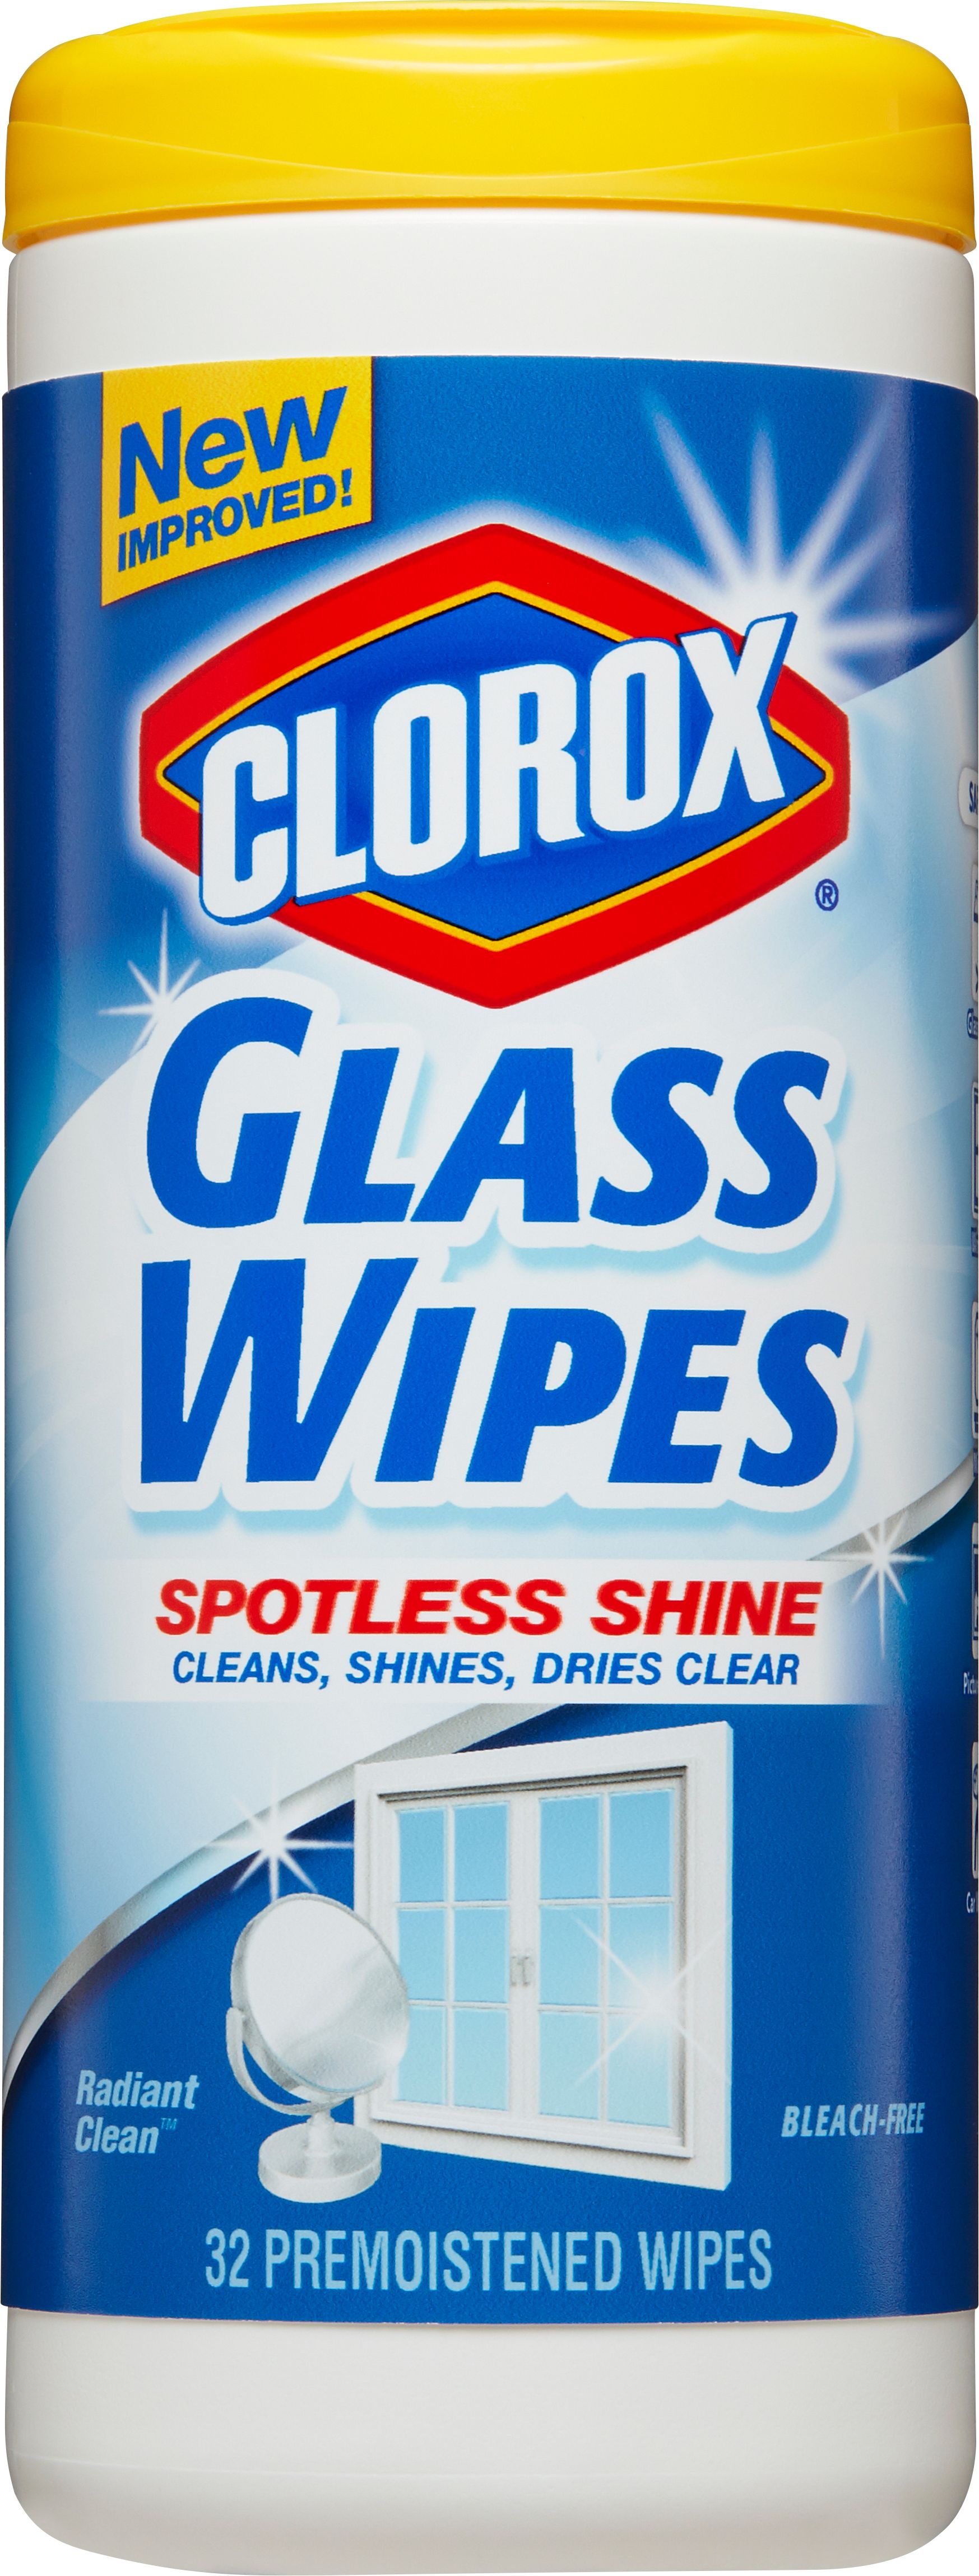 Clorox Glass Wipes, Streak Free Cleaning Wipes - Radiant Clean, 32 Count - image 1 of 8